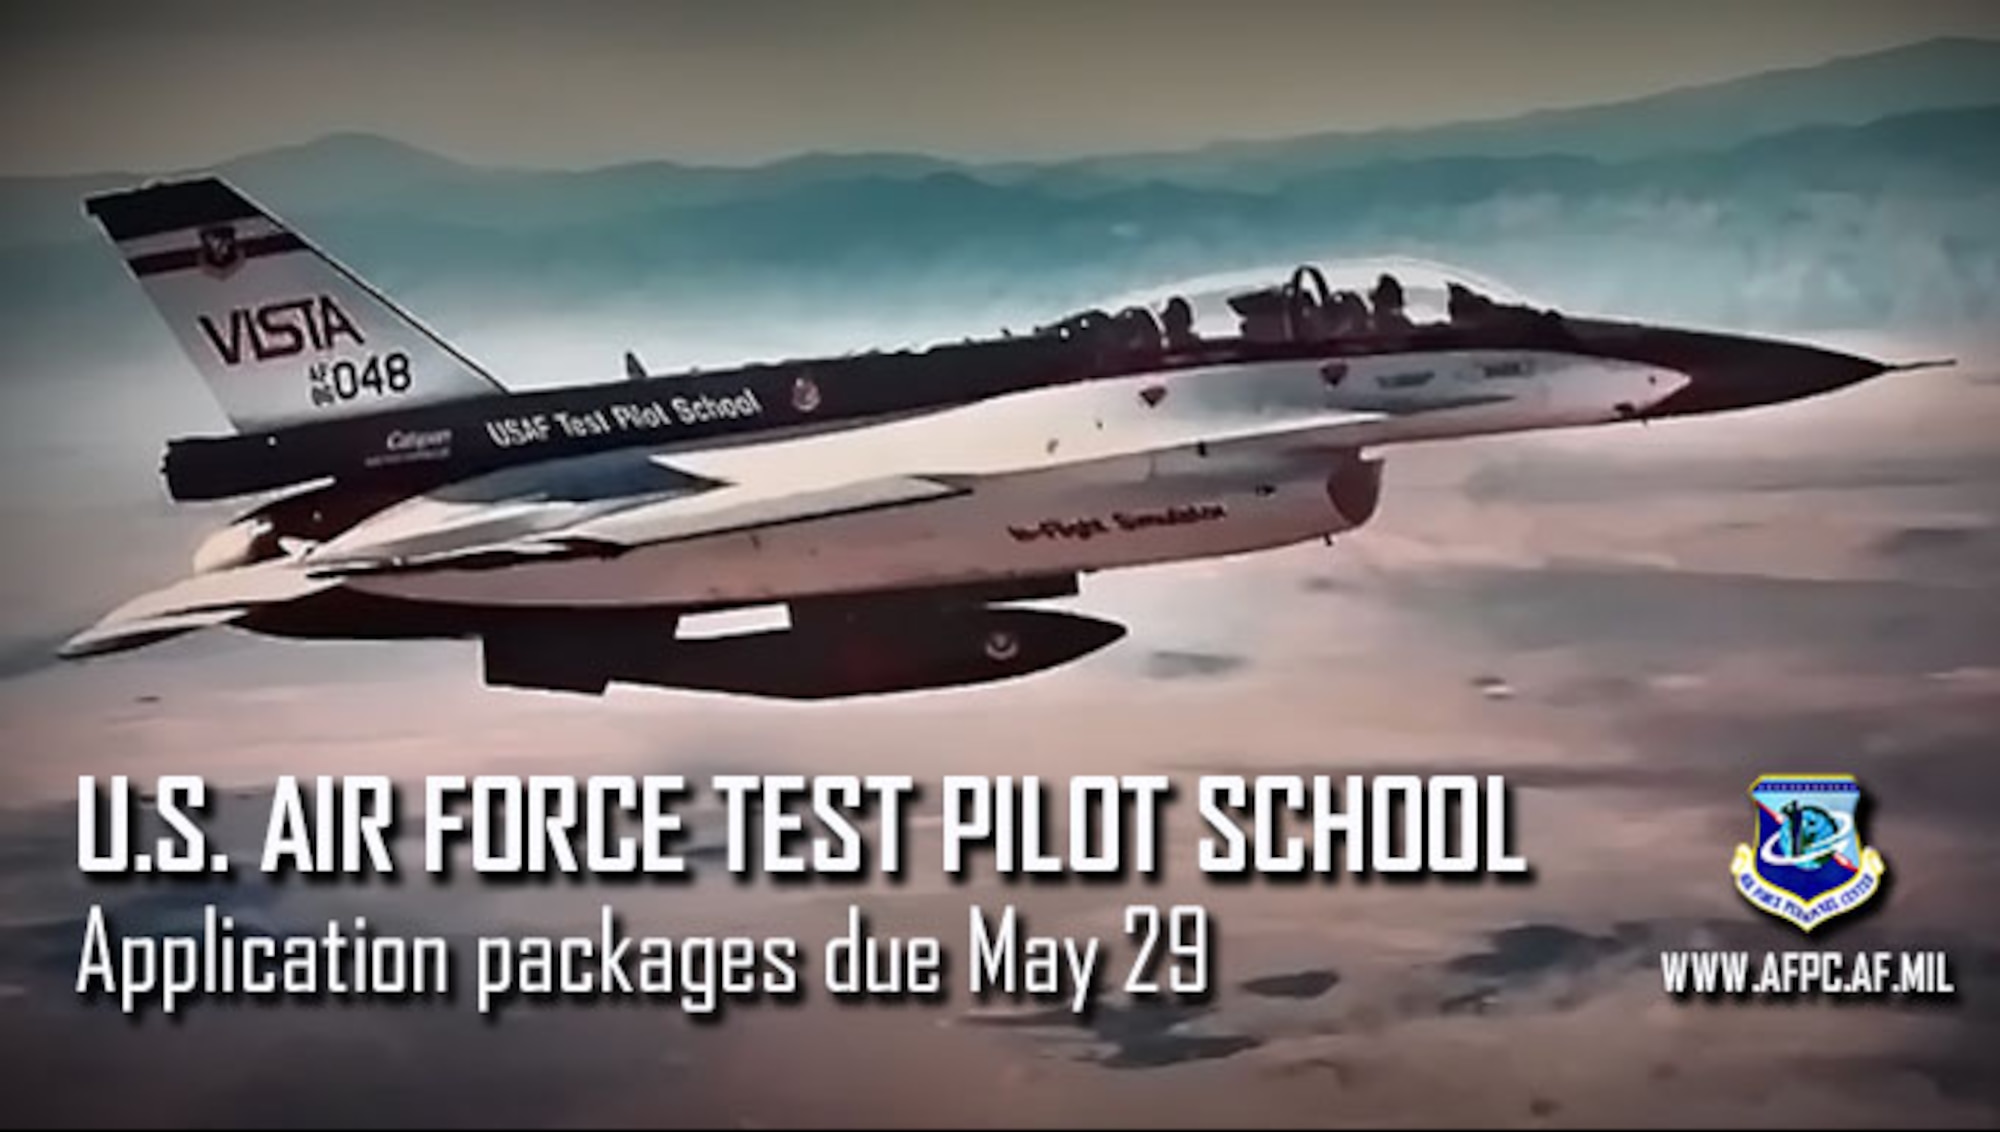 Application packages for the 2019 U.S. Air Force Test Pilot School selection board are due by May 29.